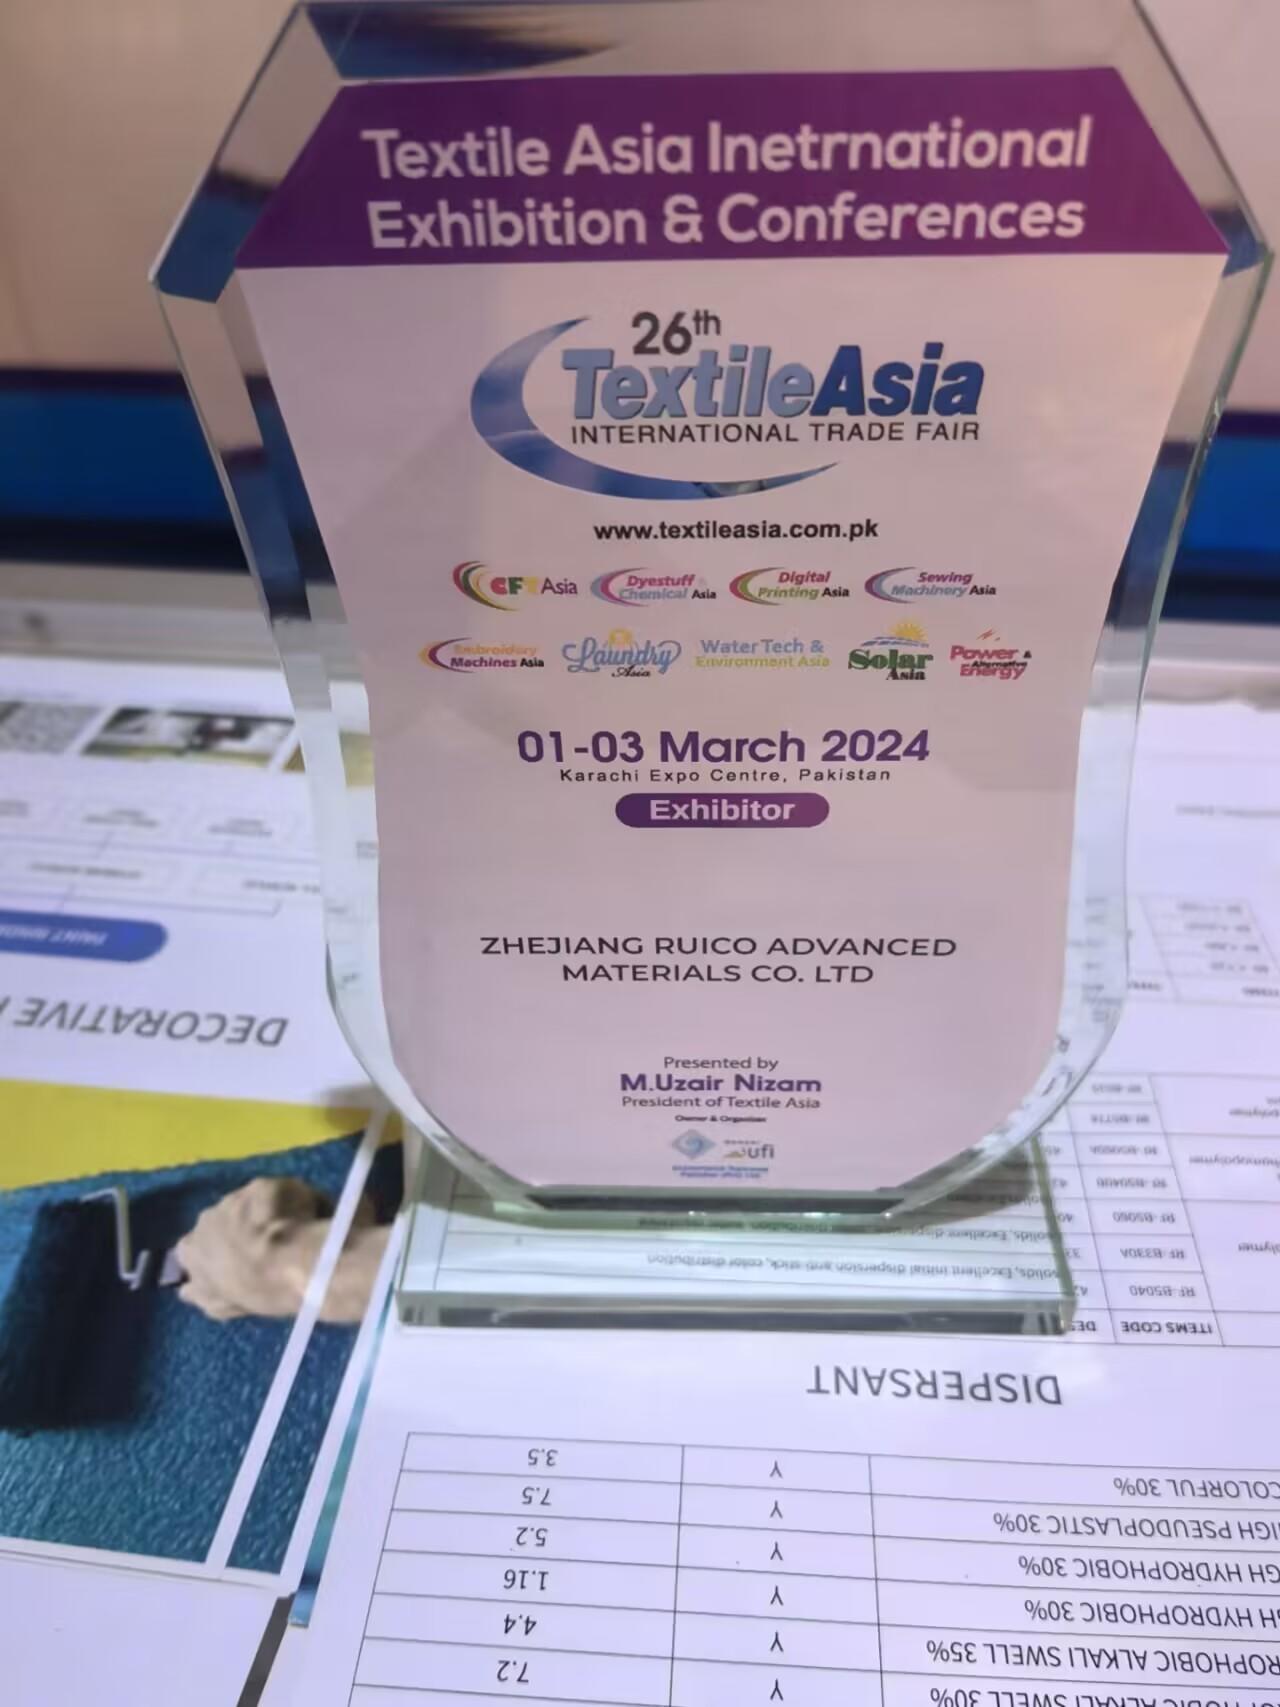 Zhejiang Ruico Advanced Materials Co., Ltd. was invited to participate in the Textile Asia International Exhibition Conferences